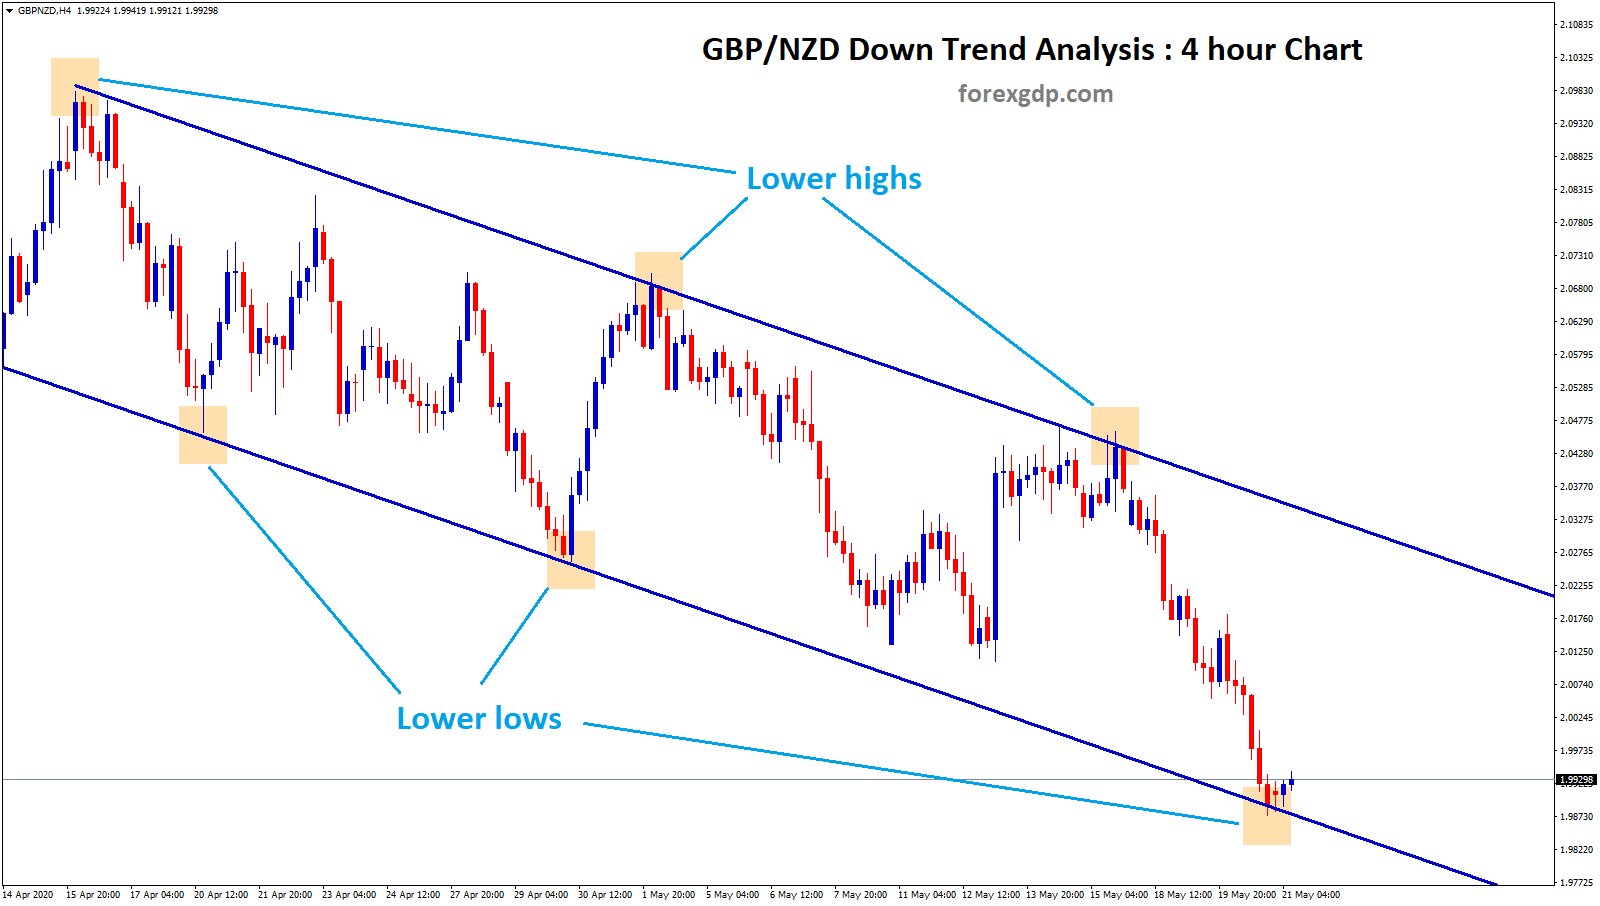 gbpnzd reached the lower lows of the down trend line